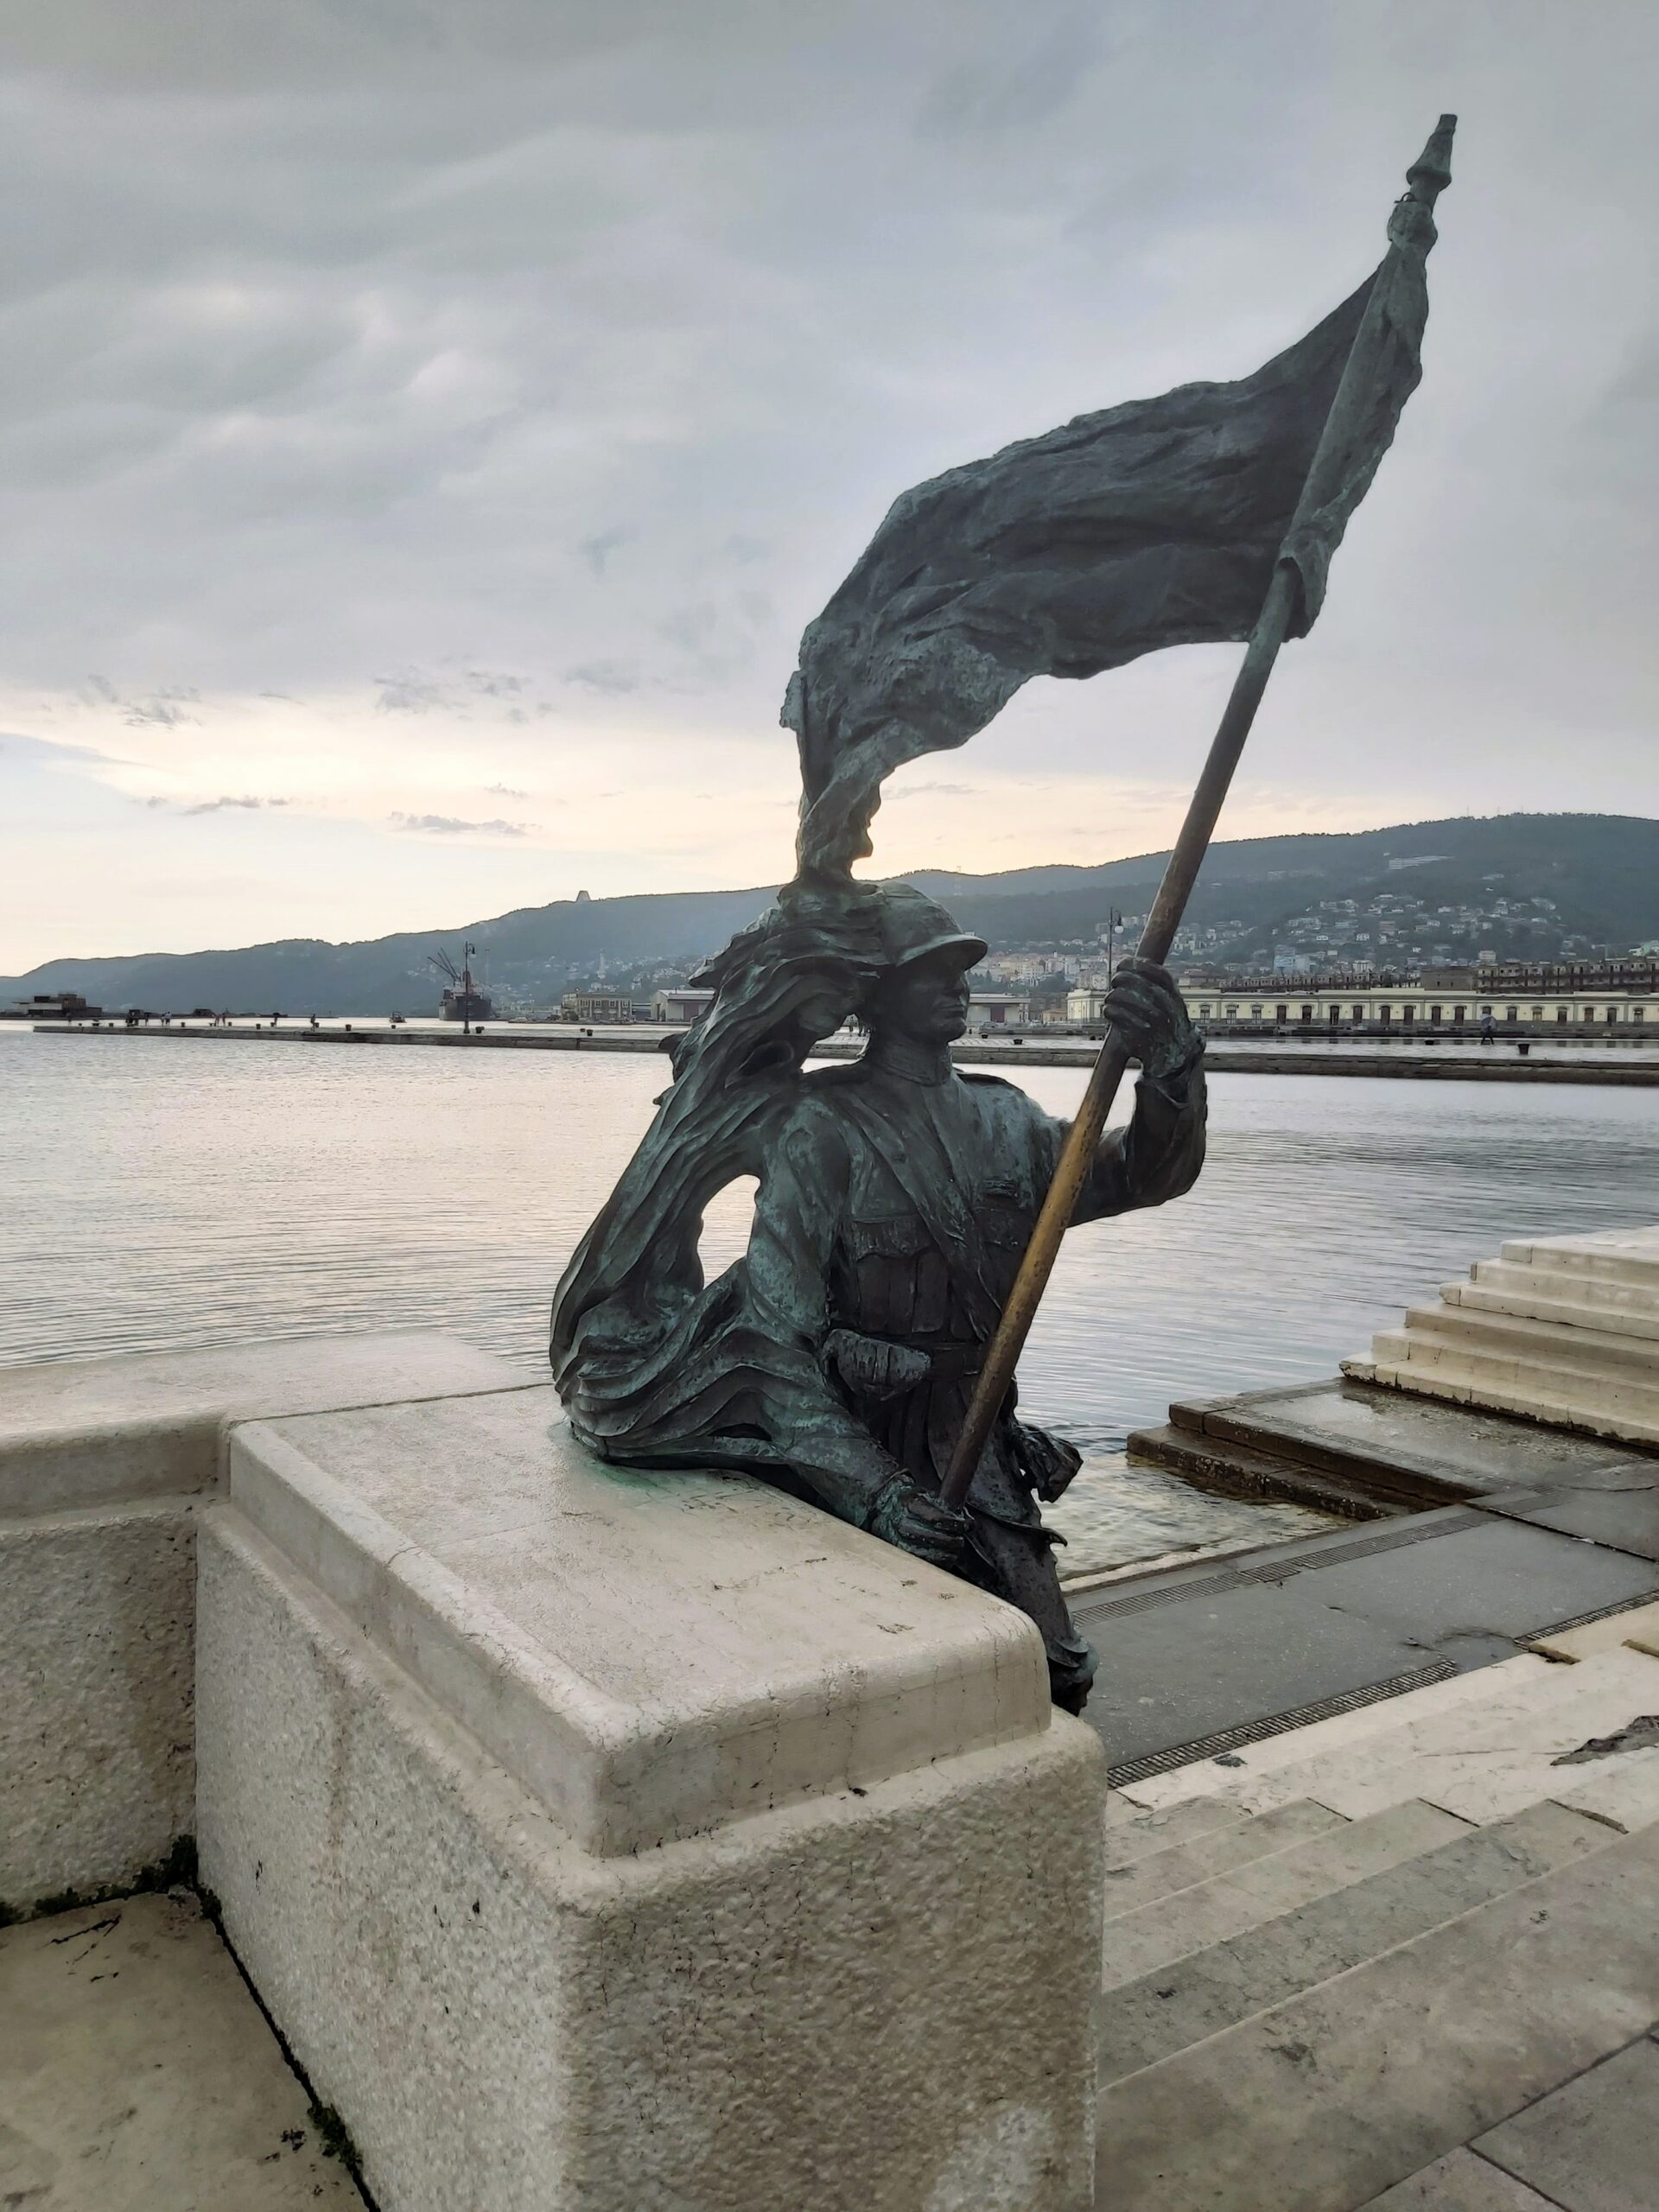 A statue of a soldier holding a flag in Trieste, Italy